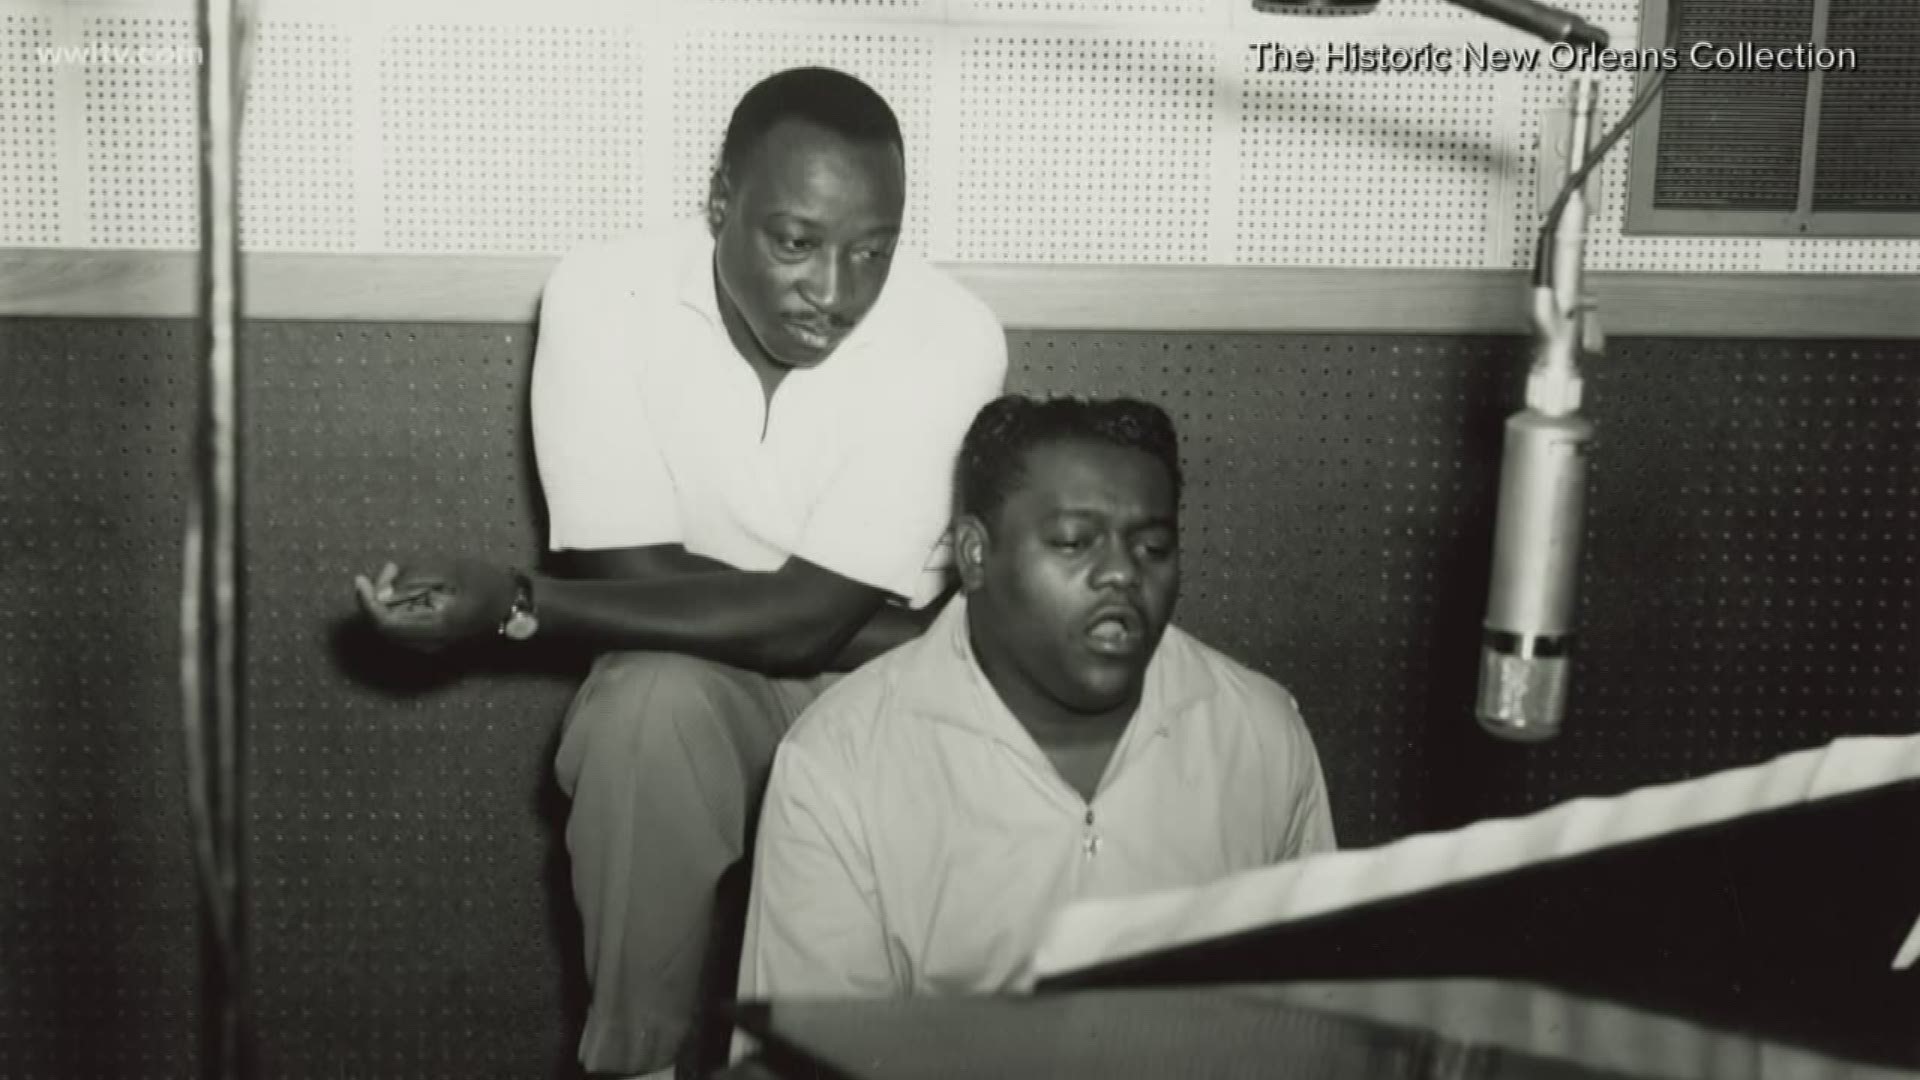 Bartholomew was known for his groundbreaking work with Fats Domino, which helped create the rock 'n' roll genre.